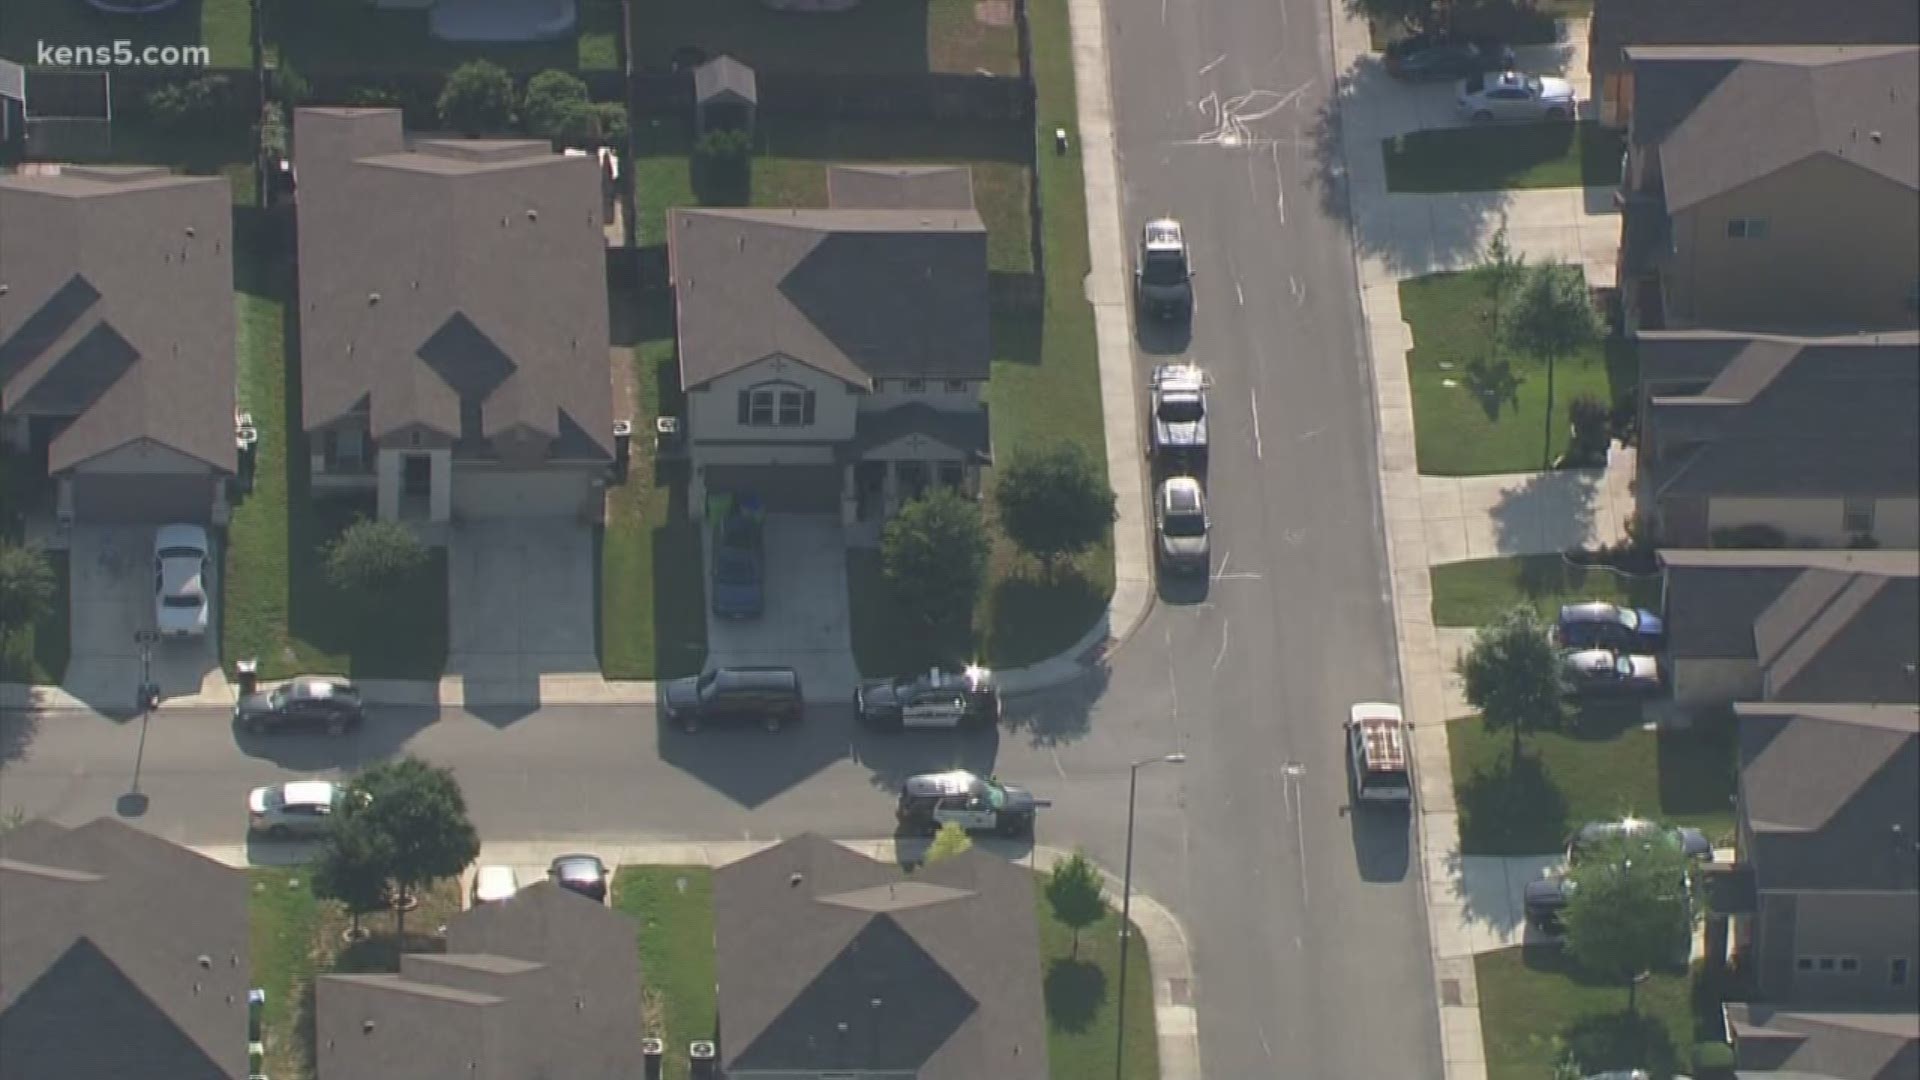 Police converge on west-side home that sources tell KENS 5 is connected to the deadly barbershop shooting and stabbing earlier today.